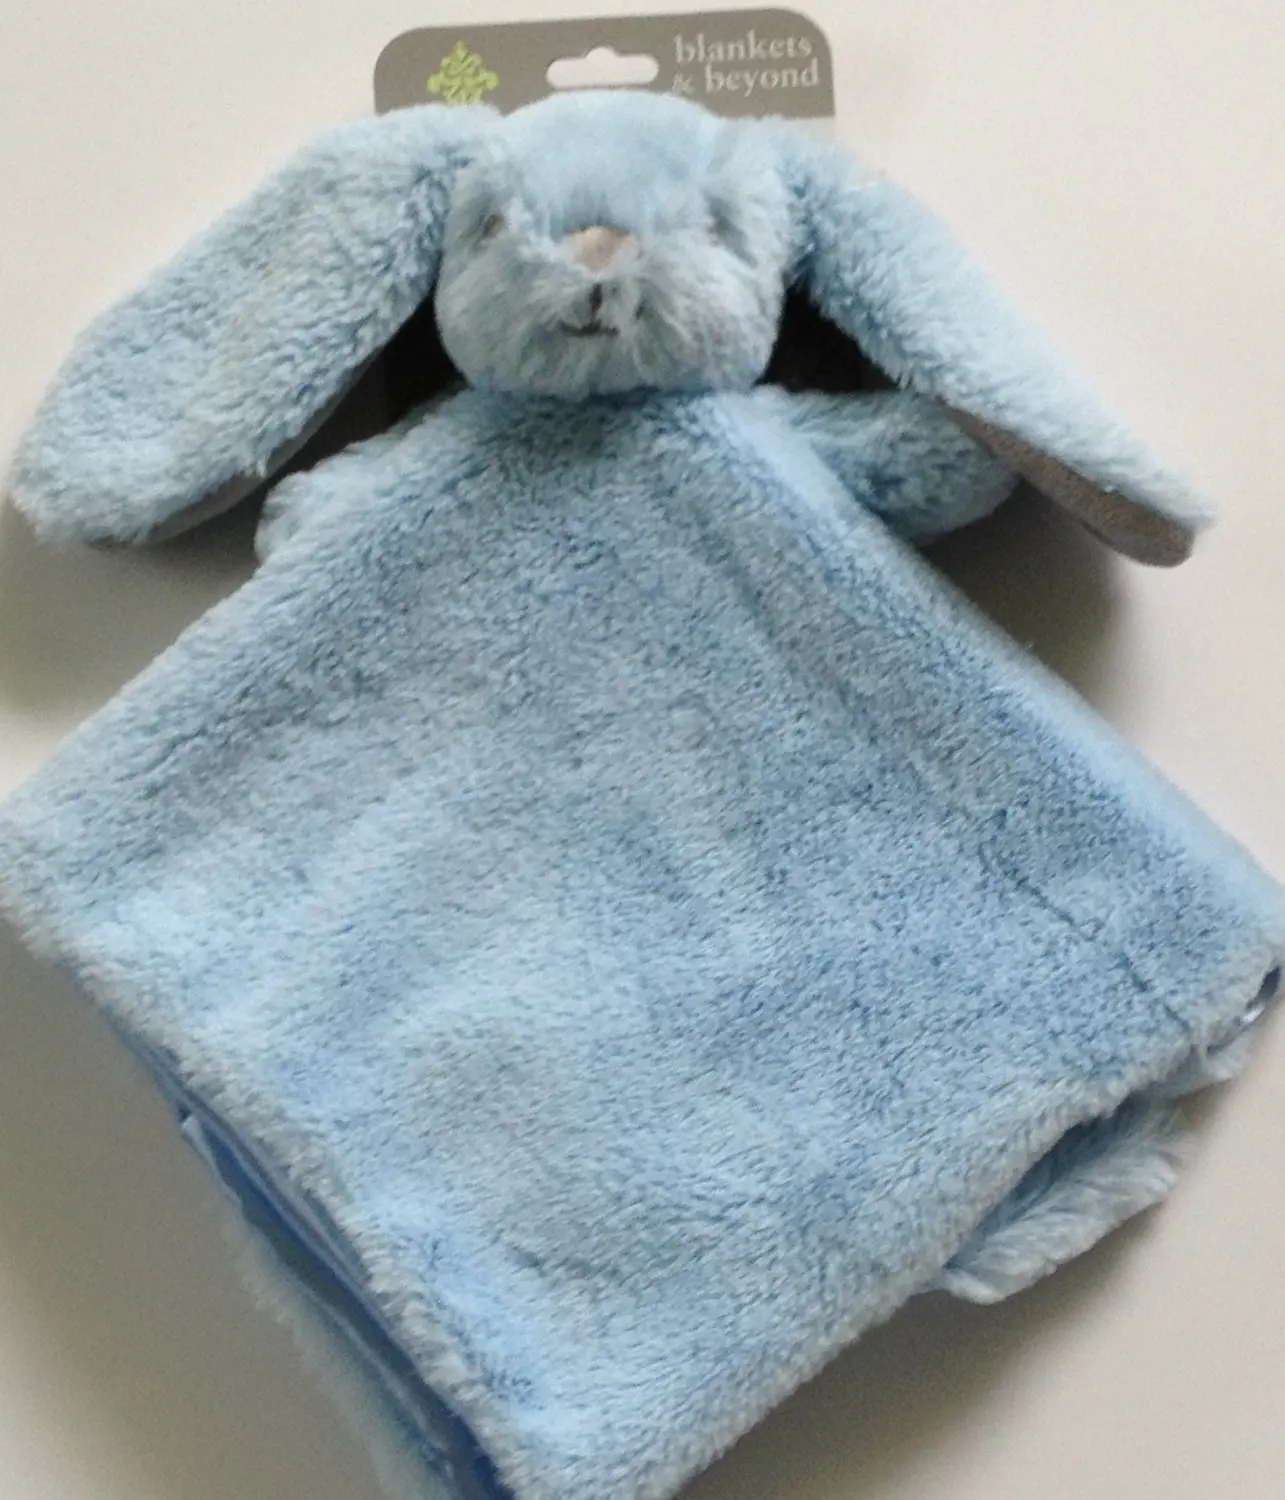 Buy Nunu Blankets Beyond Blue Plush Bunny Security Blanket Pacifier Holder 15 X 15 In Cheap Price On Alibabacom